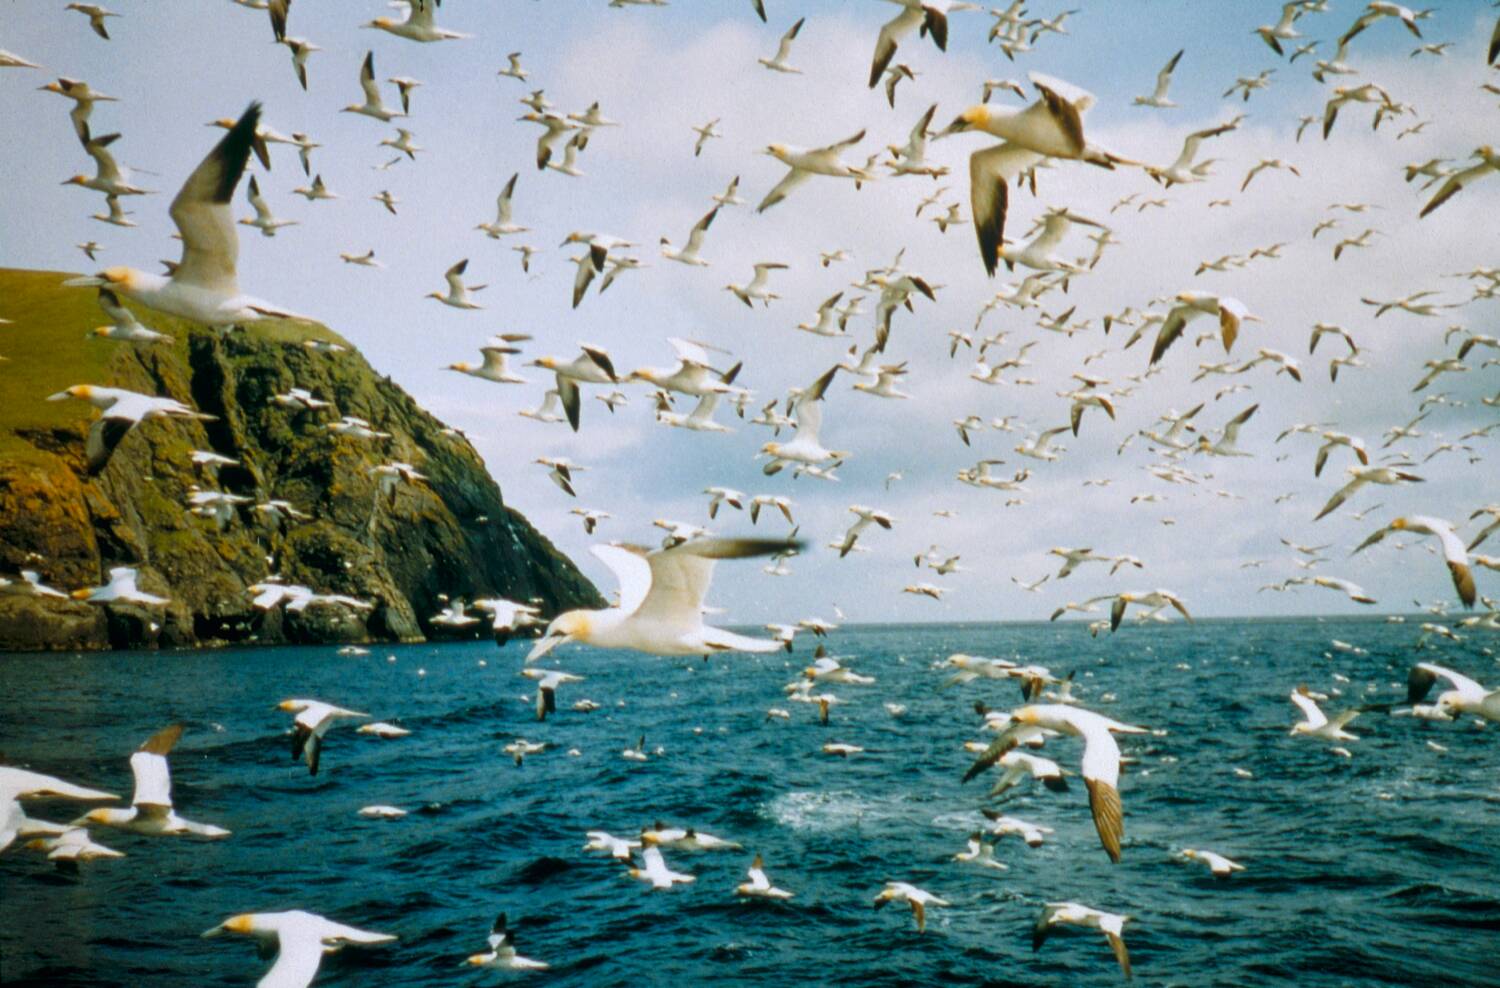 Dozens of gannets fly over the sea, close to the shore of St Kilda.